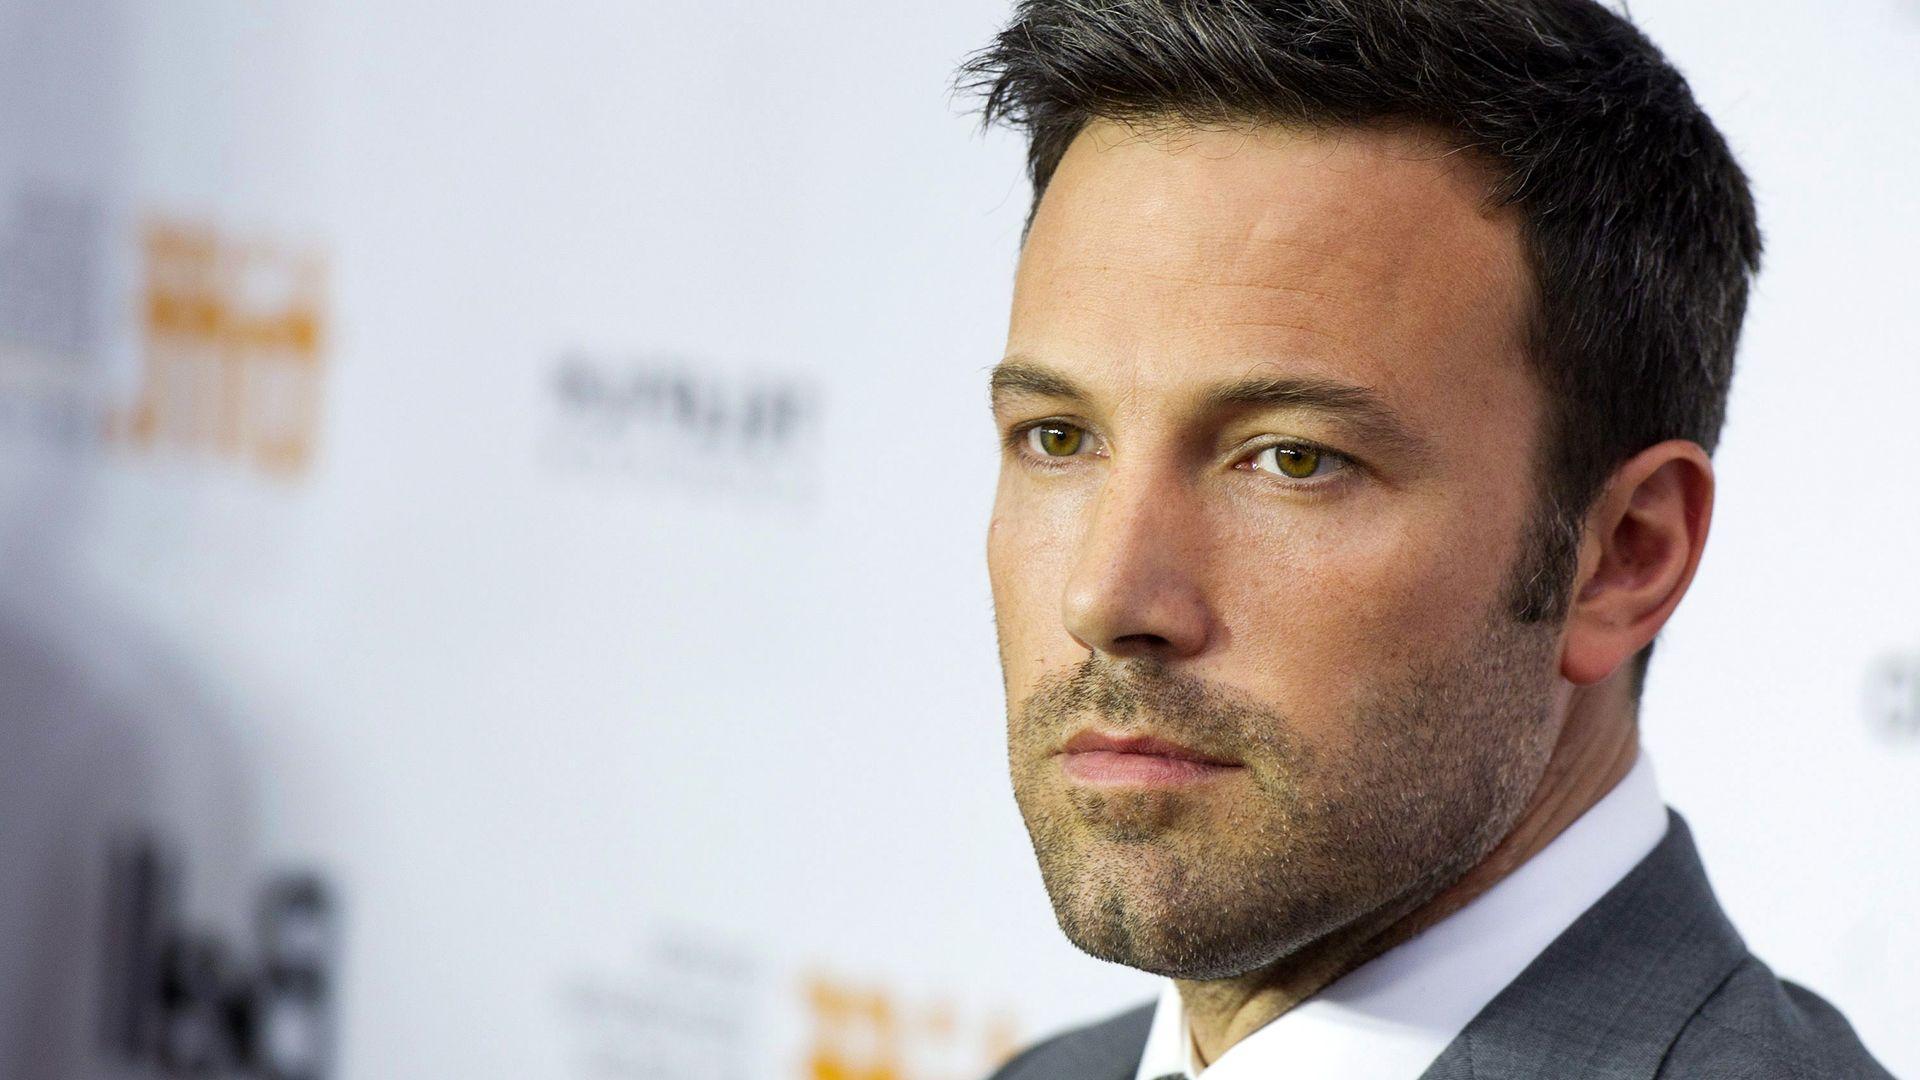 Handsome Ben Affleck with shaved beared and wearing a gray suit